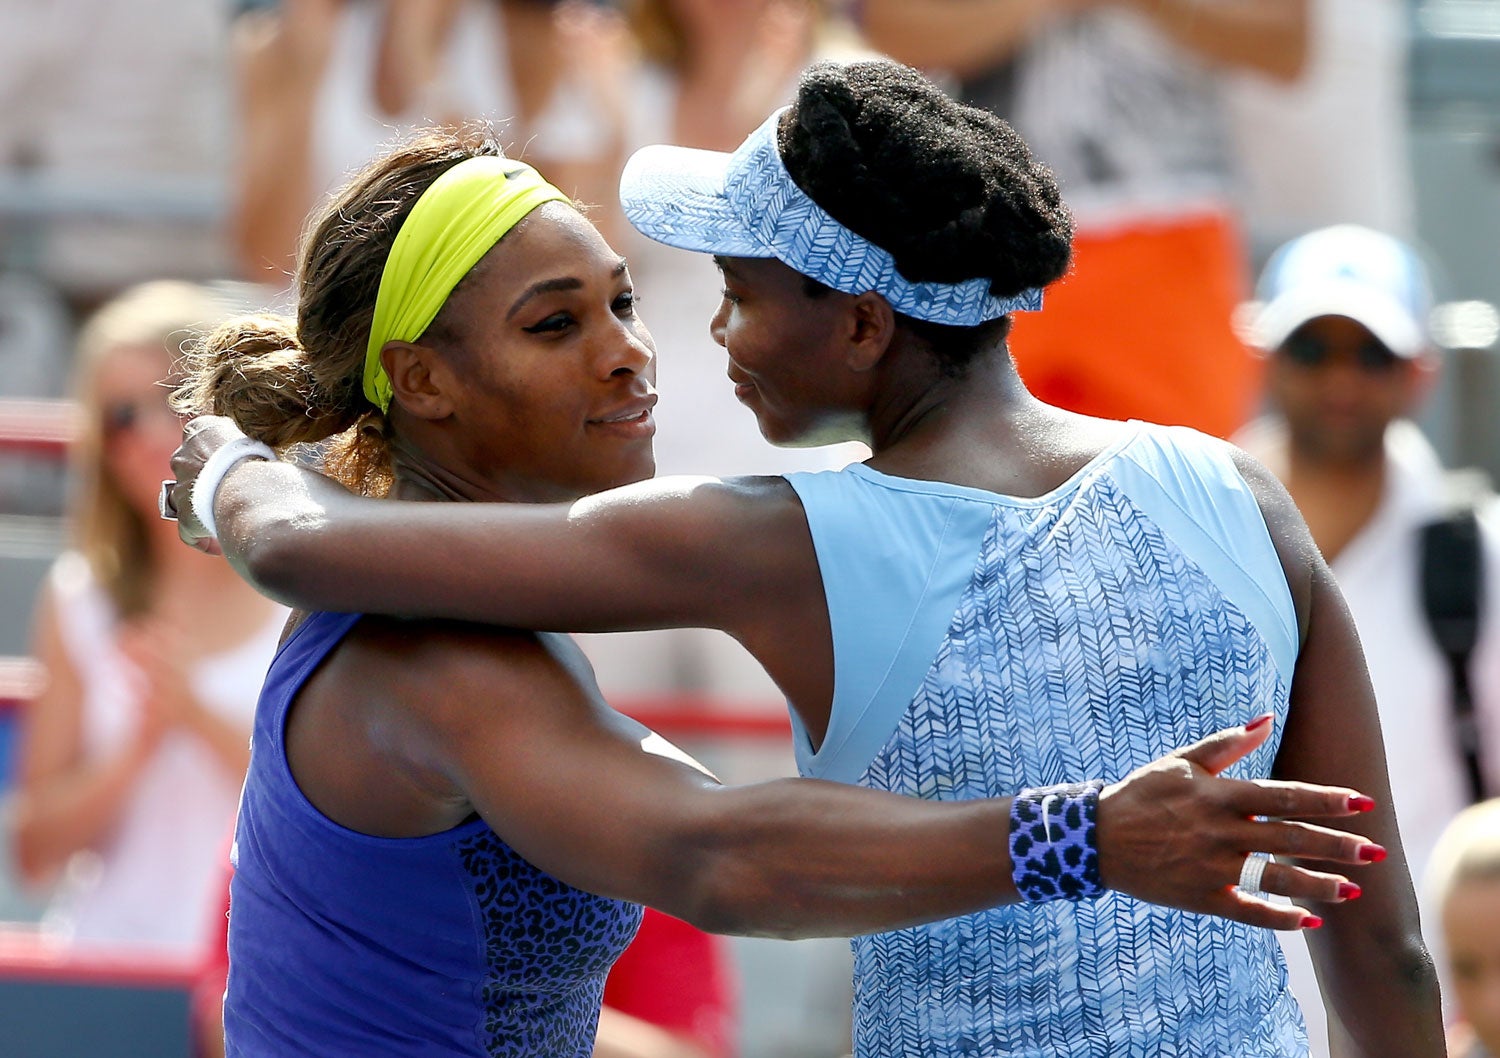 Dare We Ask, Which Williams Sister Do You Think Will Advance in the U.S. Open Tonight?